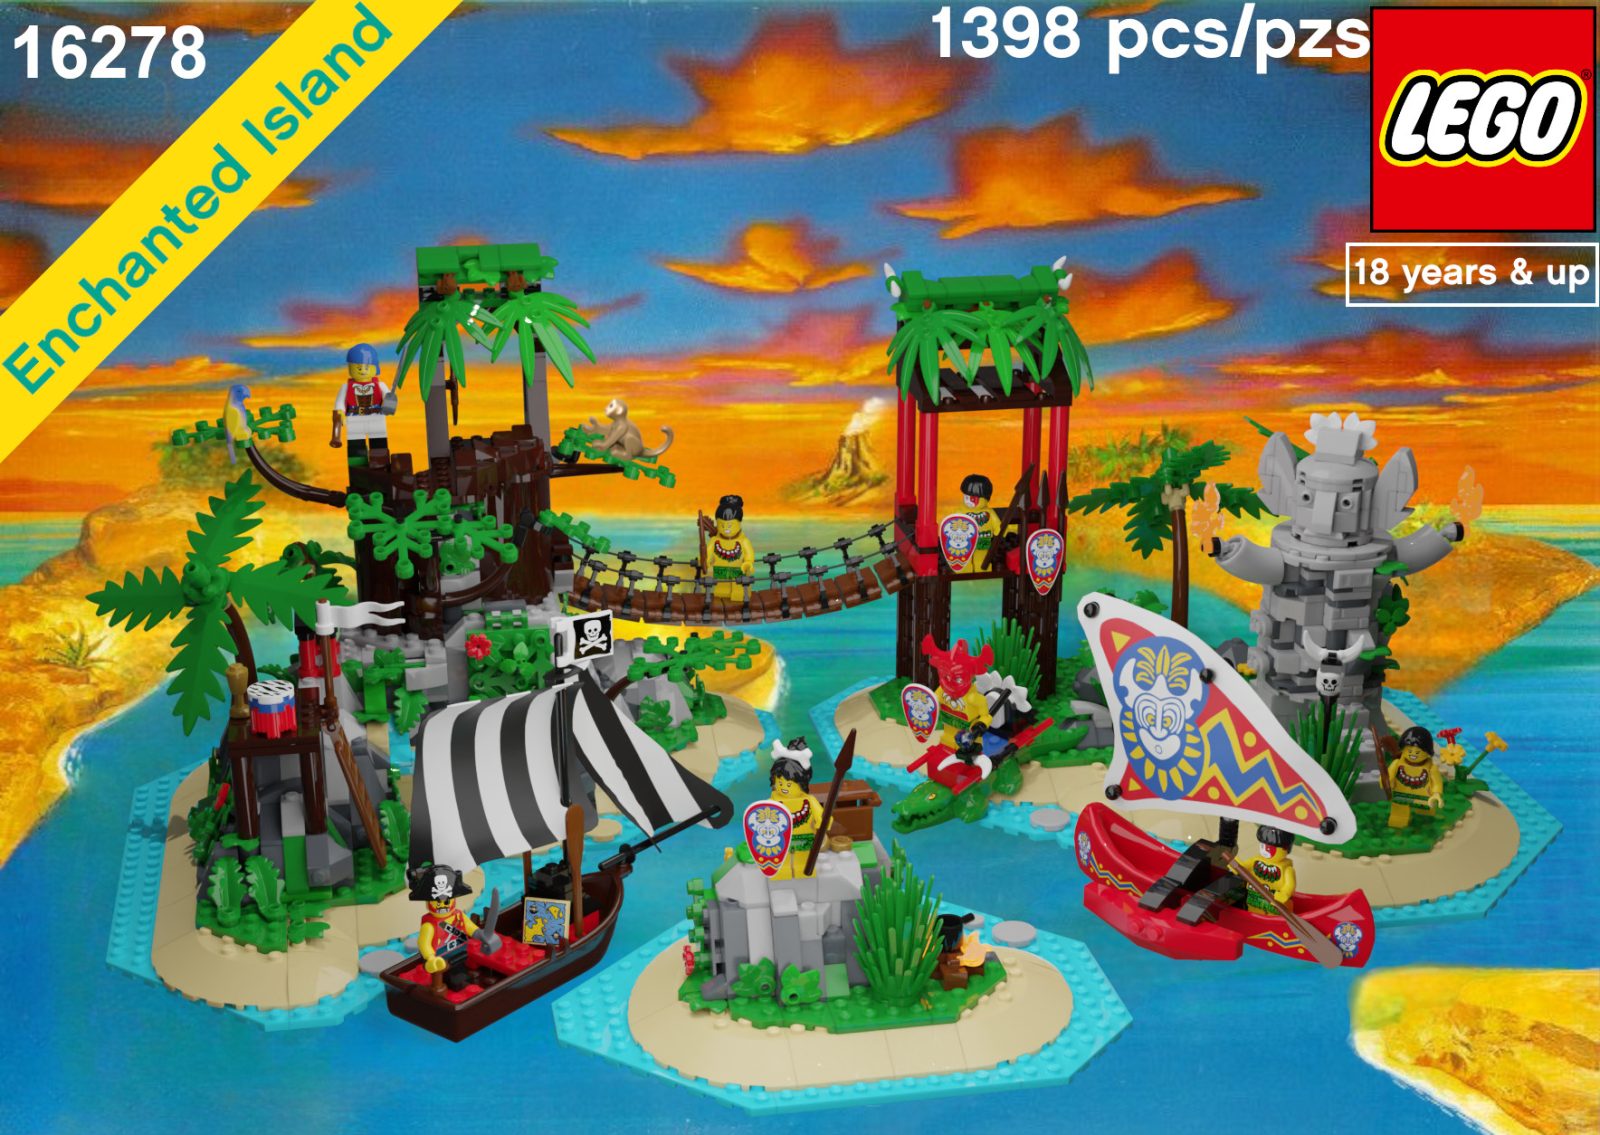 Featured Image for “6278/6292 Enchanted Island Remake” by Danny_Boy4